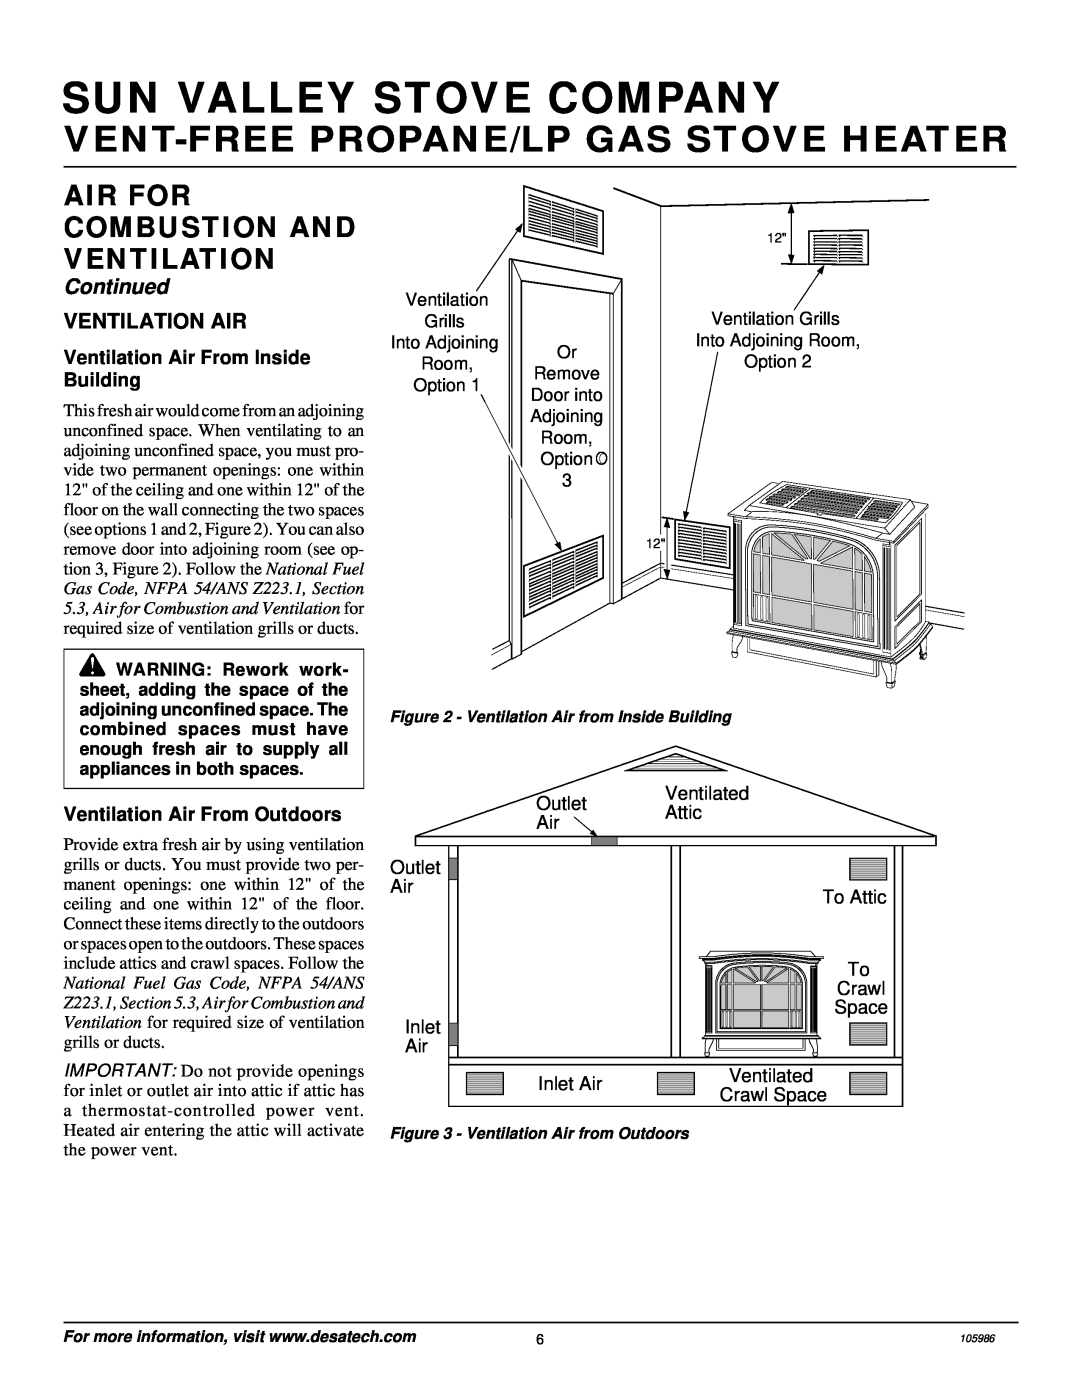 Desa MSVFBP Ventilation Air From Inside, Building, Ventilation Air From Outdoors, Sun Valley Stove Company, Continued 